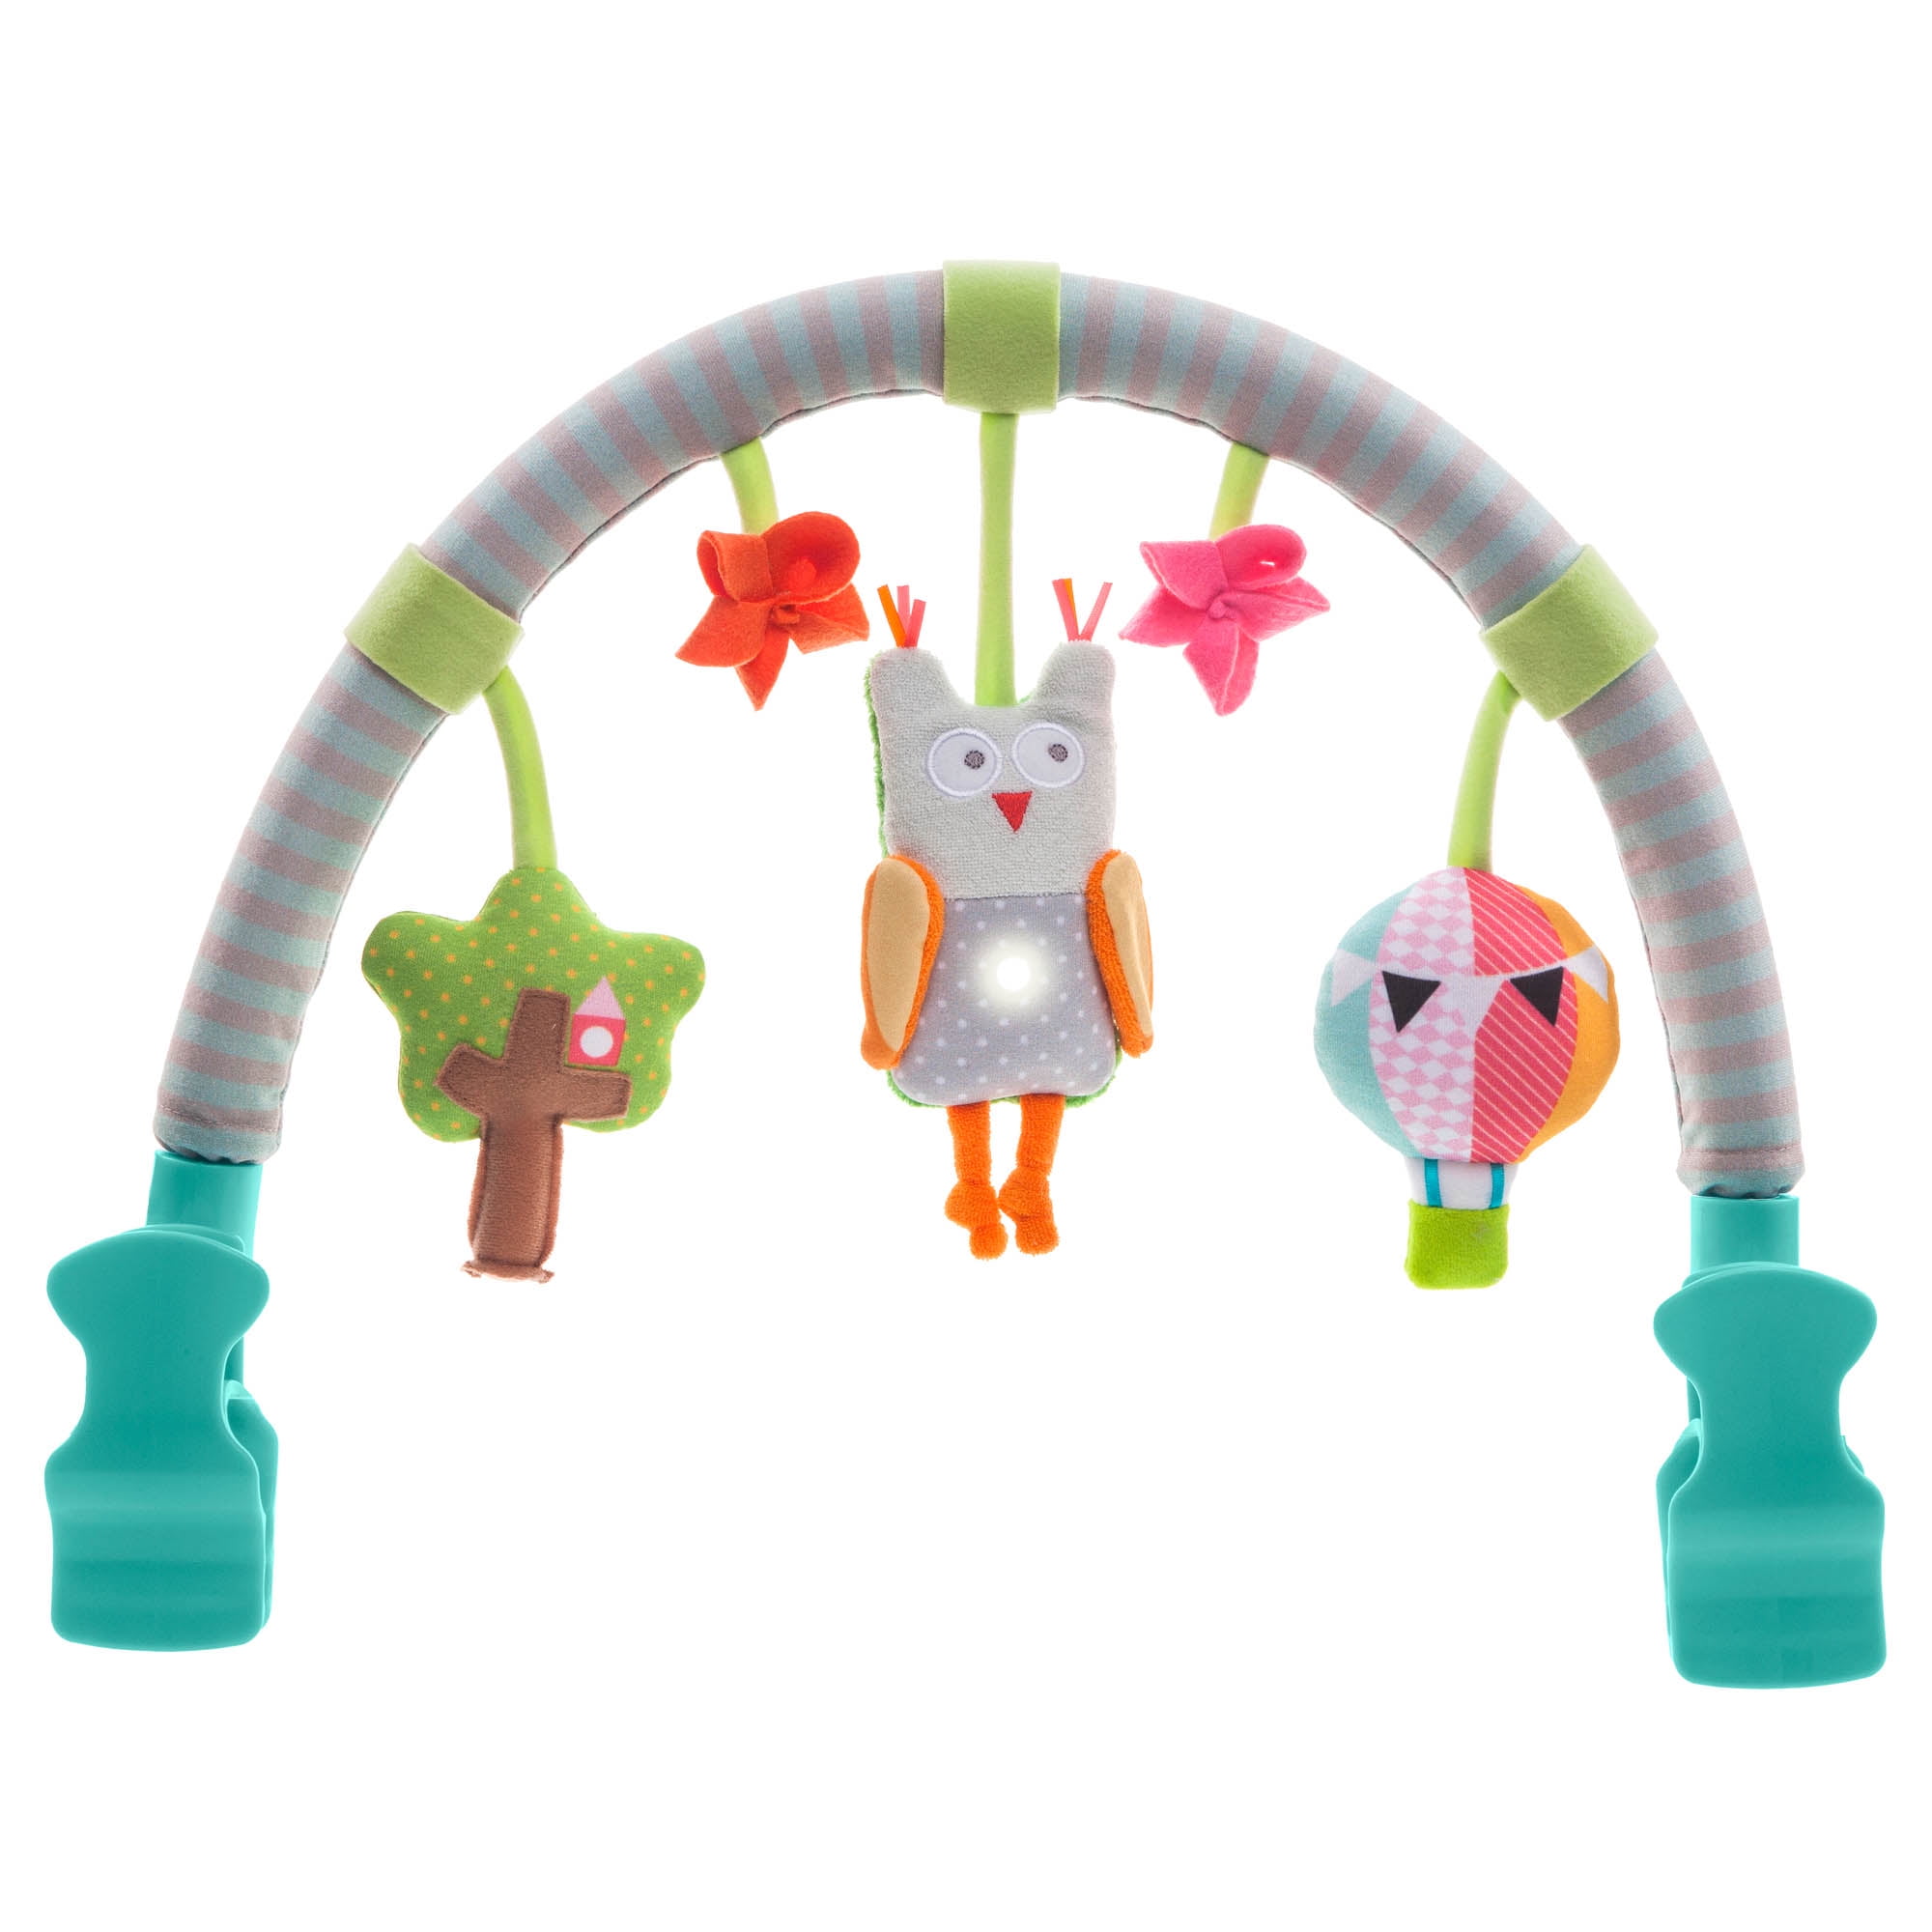 Funny Cute Cartoon Animal Ears Mirror,Wrap Baby Stroller Pendant Toys,Car Seat Educational Soother Pacifier Newborn Infant Gifts